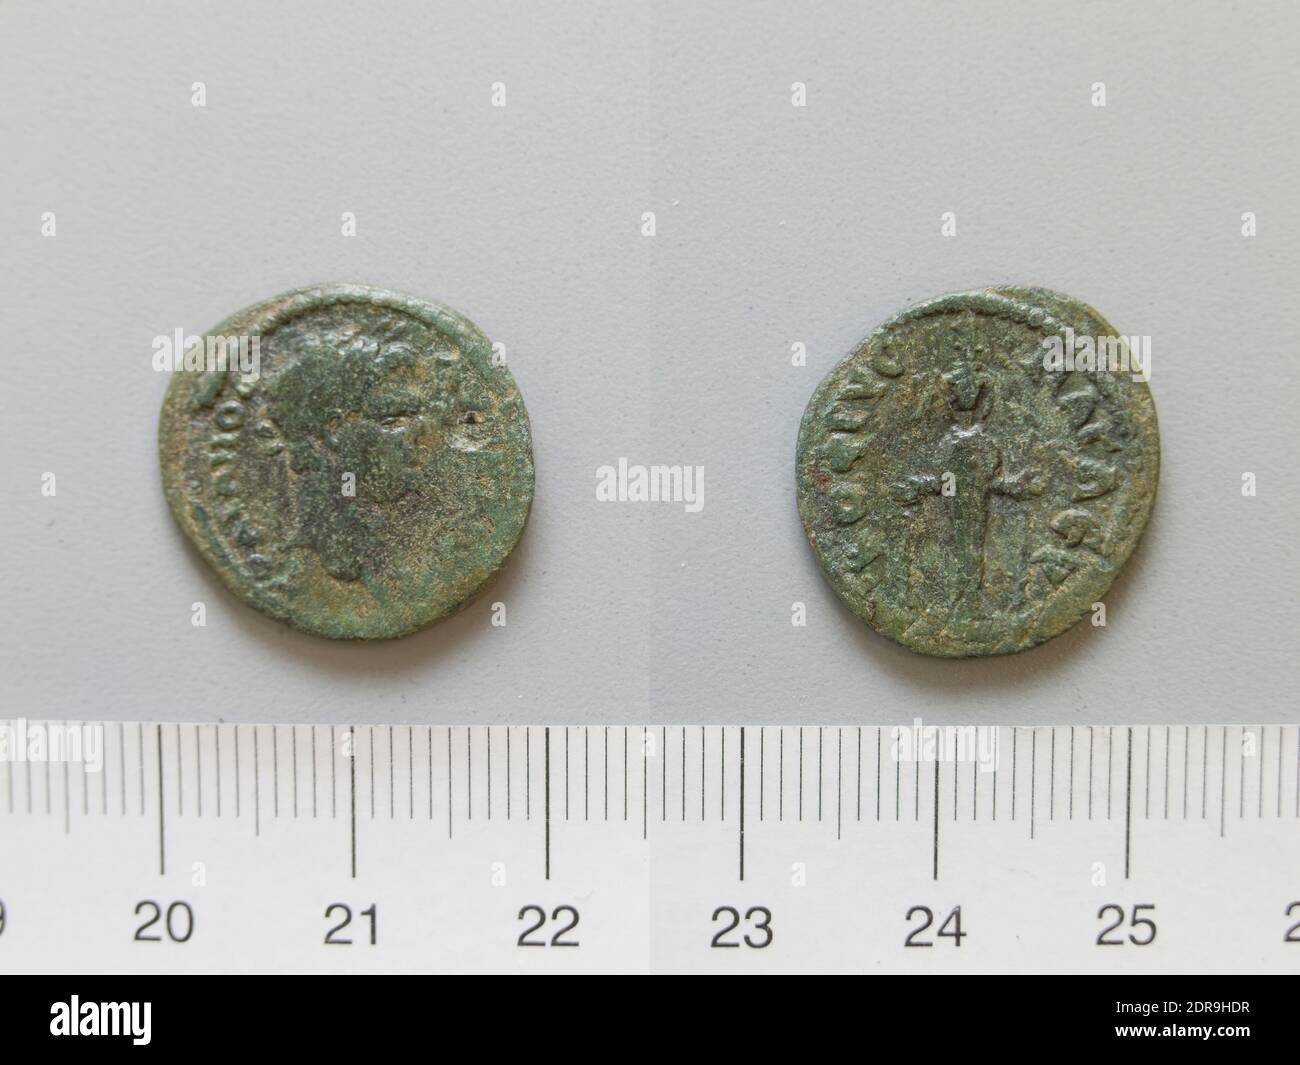 Ruler: Trajan, Emperor of Rome, A.D. 53–117, ruled 98–117, Mint: Magnesia, Coin of Trajan, Emperor of Rome from Magnesia, A.D. 98–117, Bronze, 3.87 g, 12:00, 19.5 mm, Made in Magnesia, Ionia, Greek, 1st–2nd century A.D., Numismatics Stock Photo